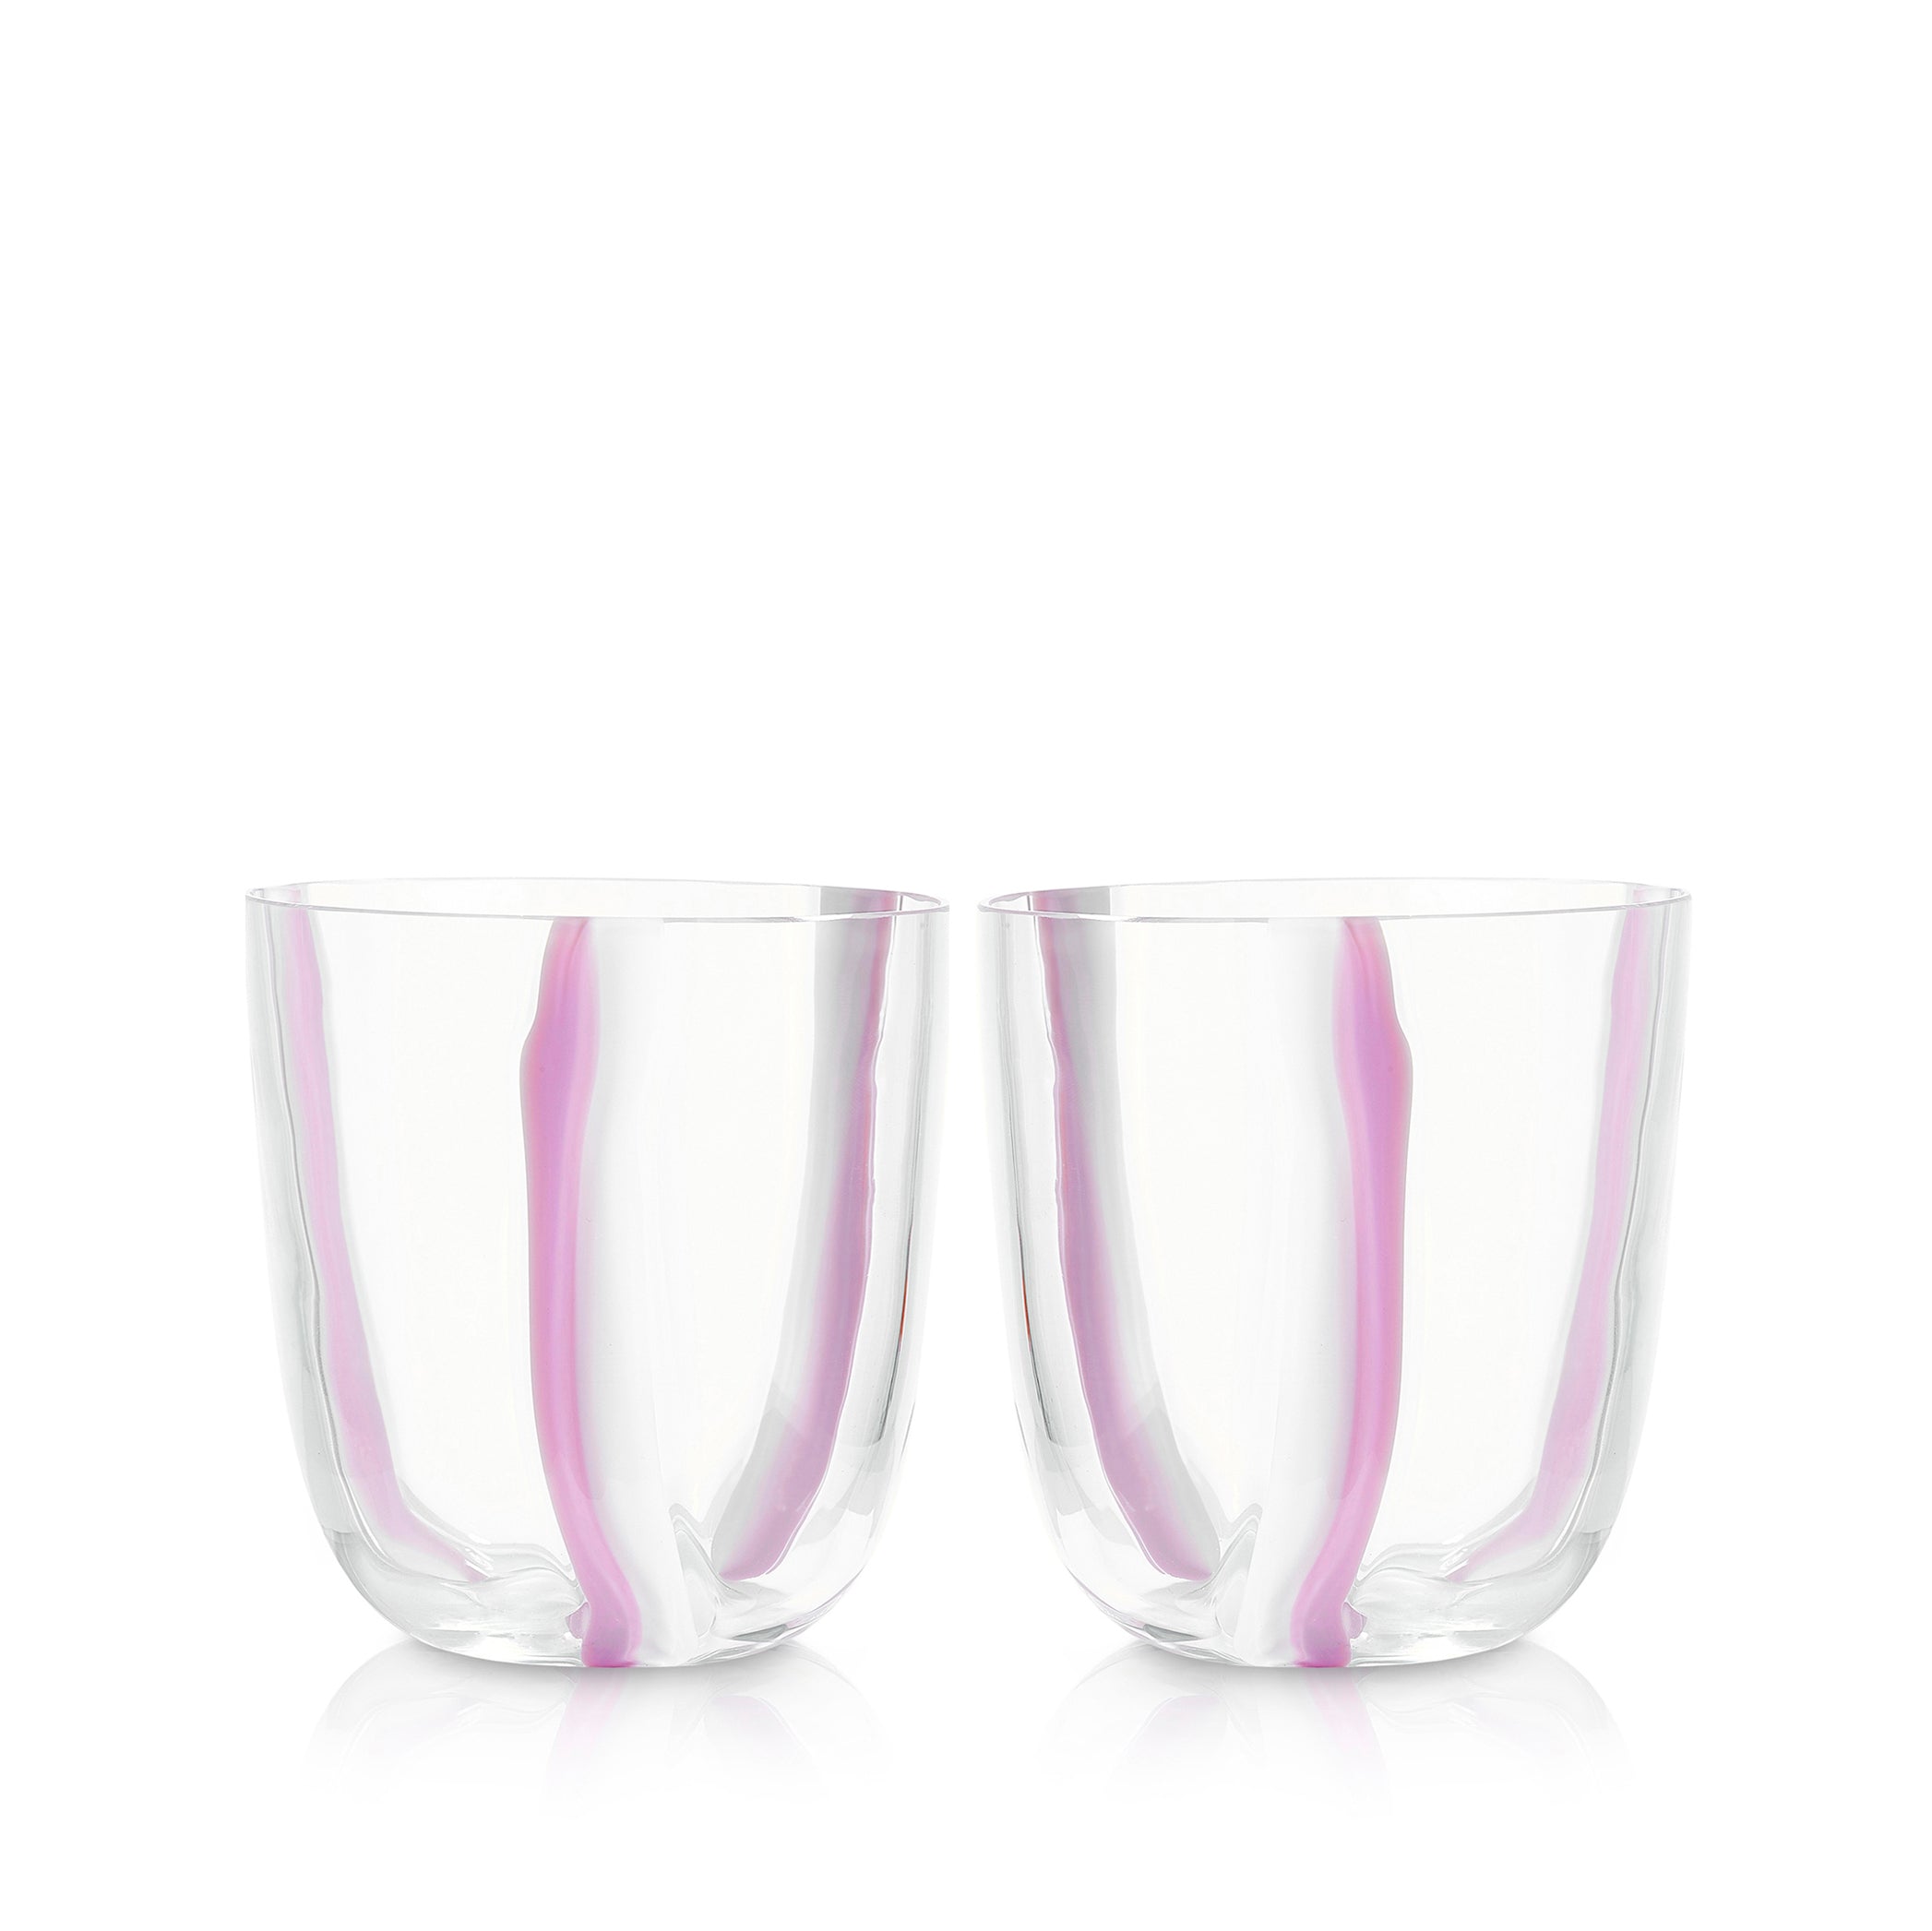 Set of Two Handblown Stripe Glass Tumblers in Rose Pink & White, 8.5cm